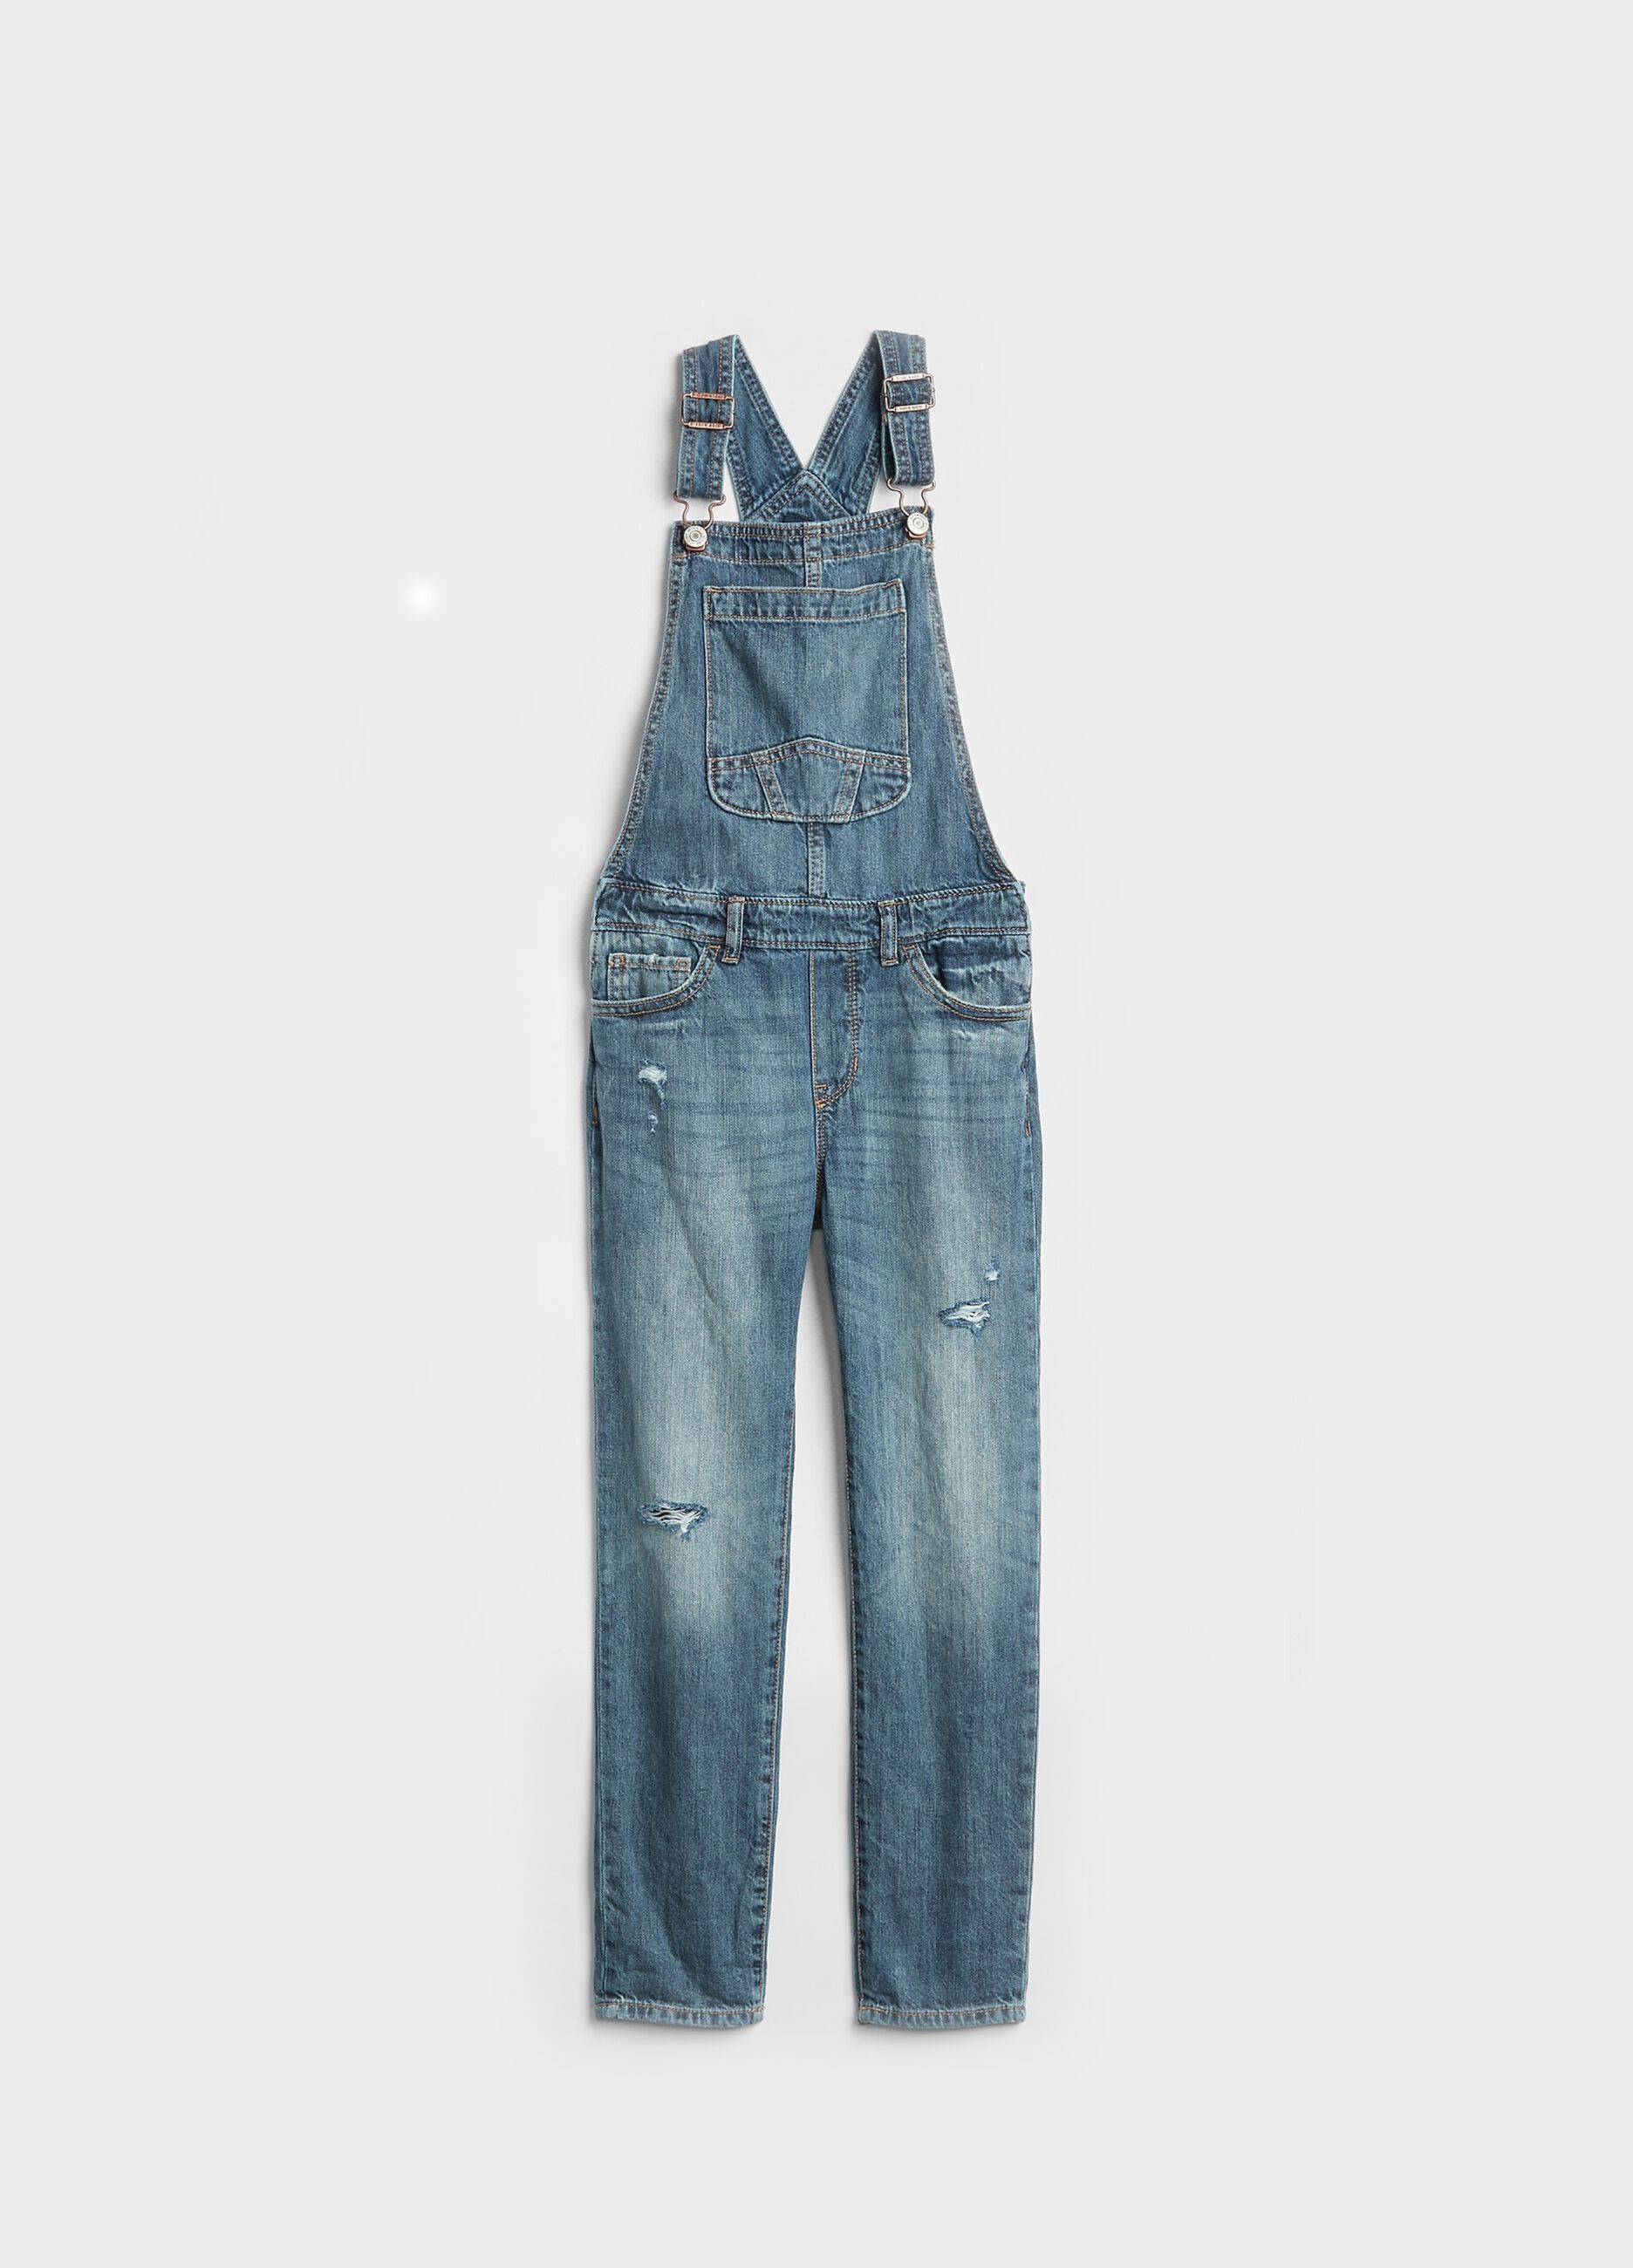 Denim dungarees with rips